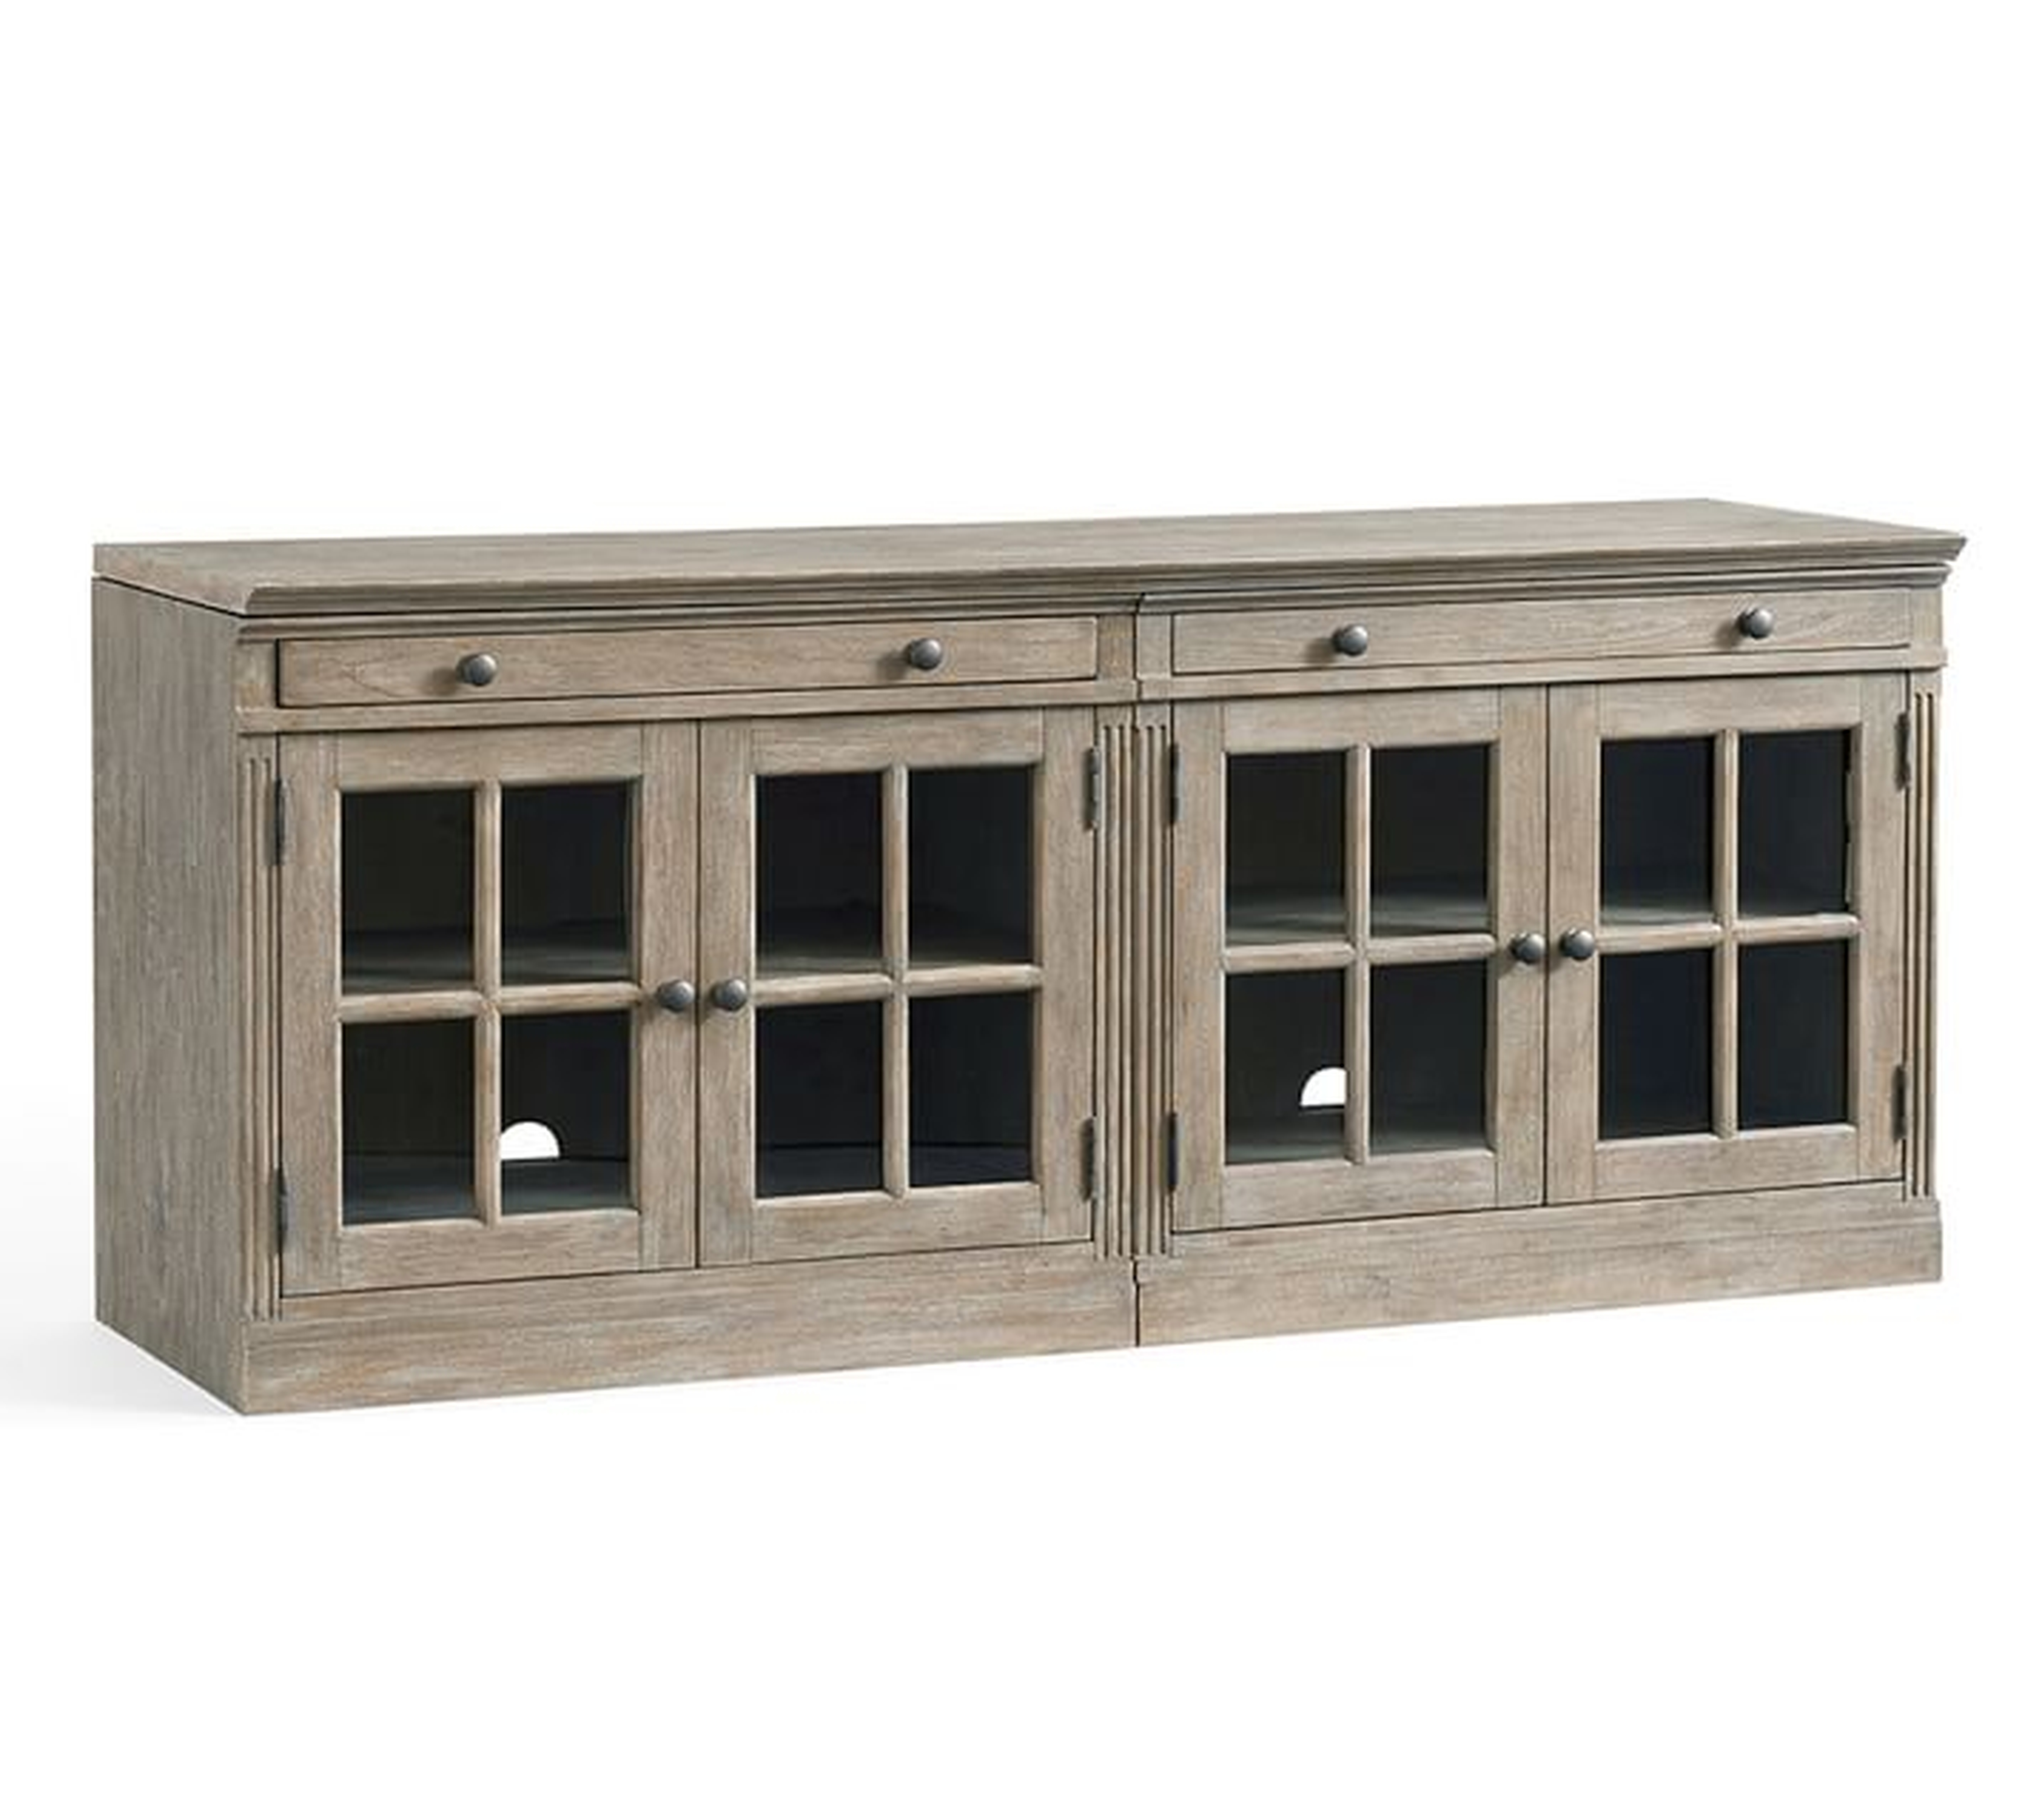 Livingston 70" Media Console With Glass Cabinets, Gray Wash - Pottery Barn